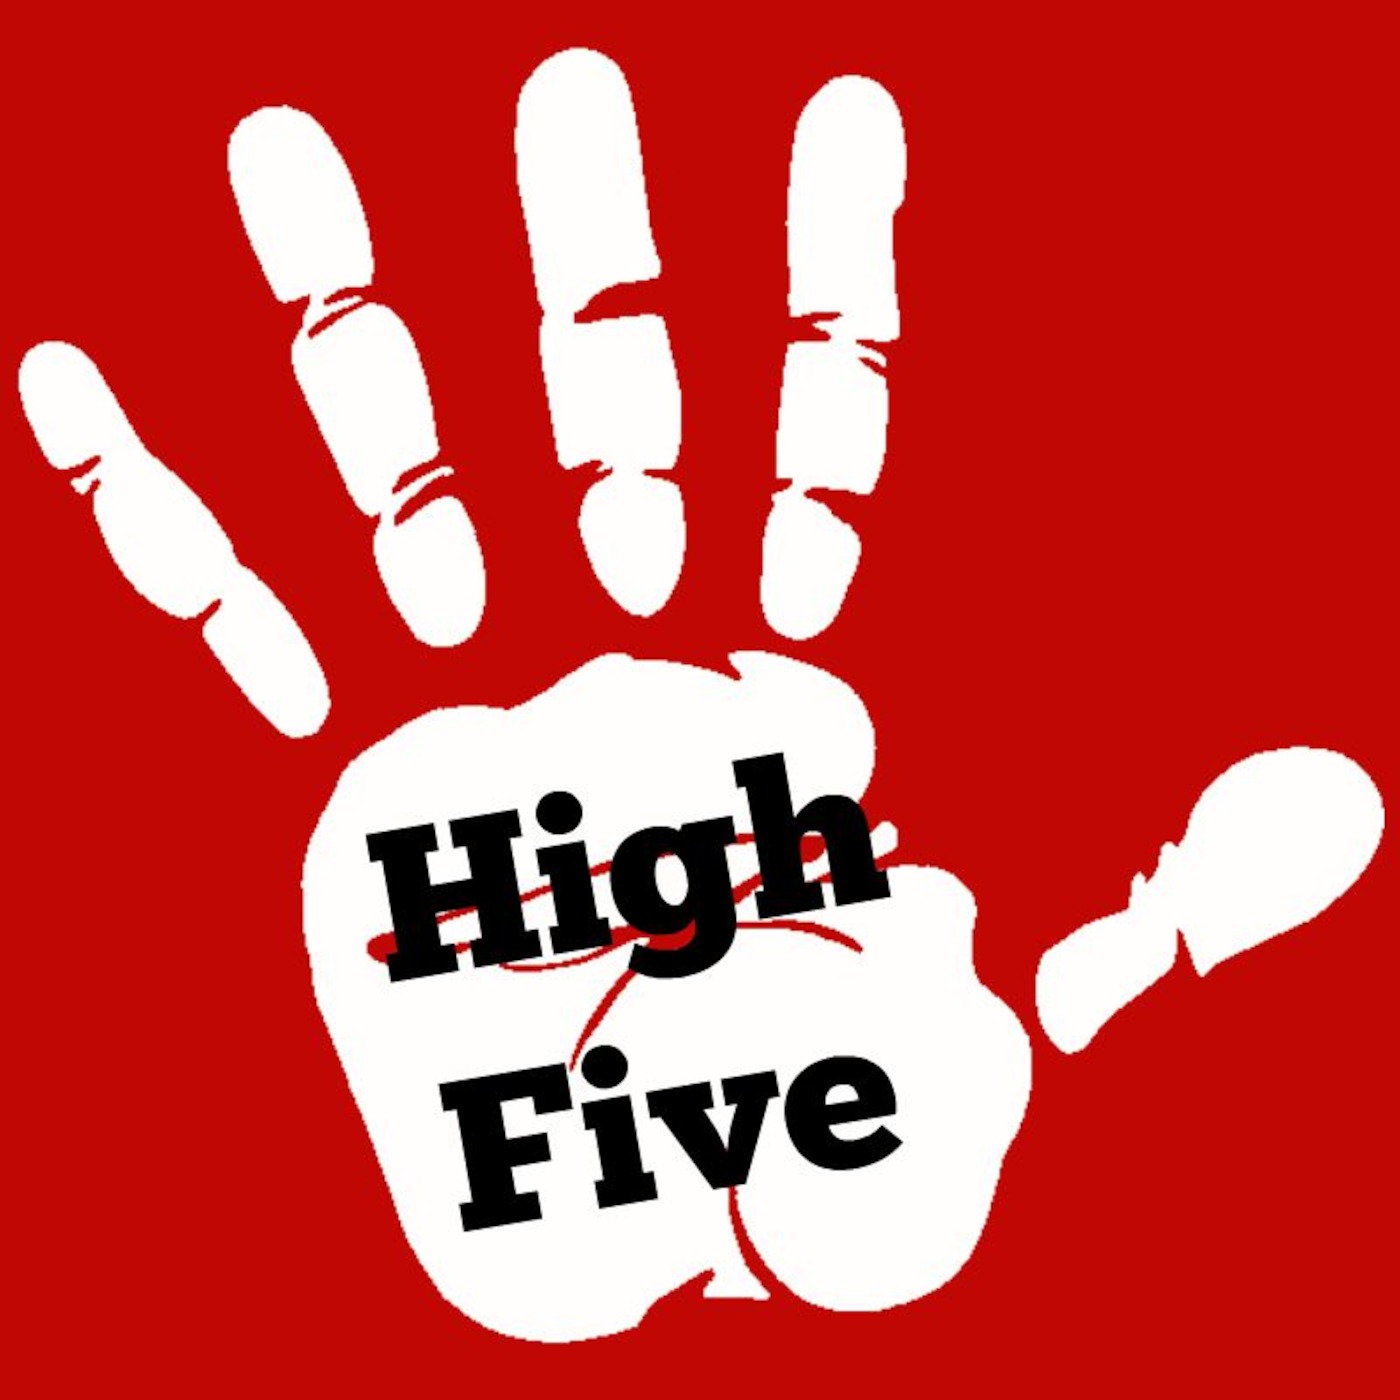 Be high five